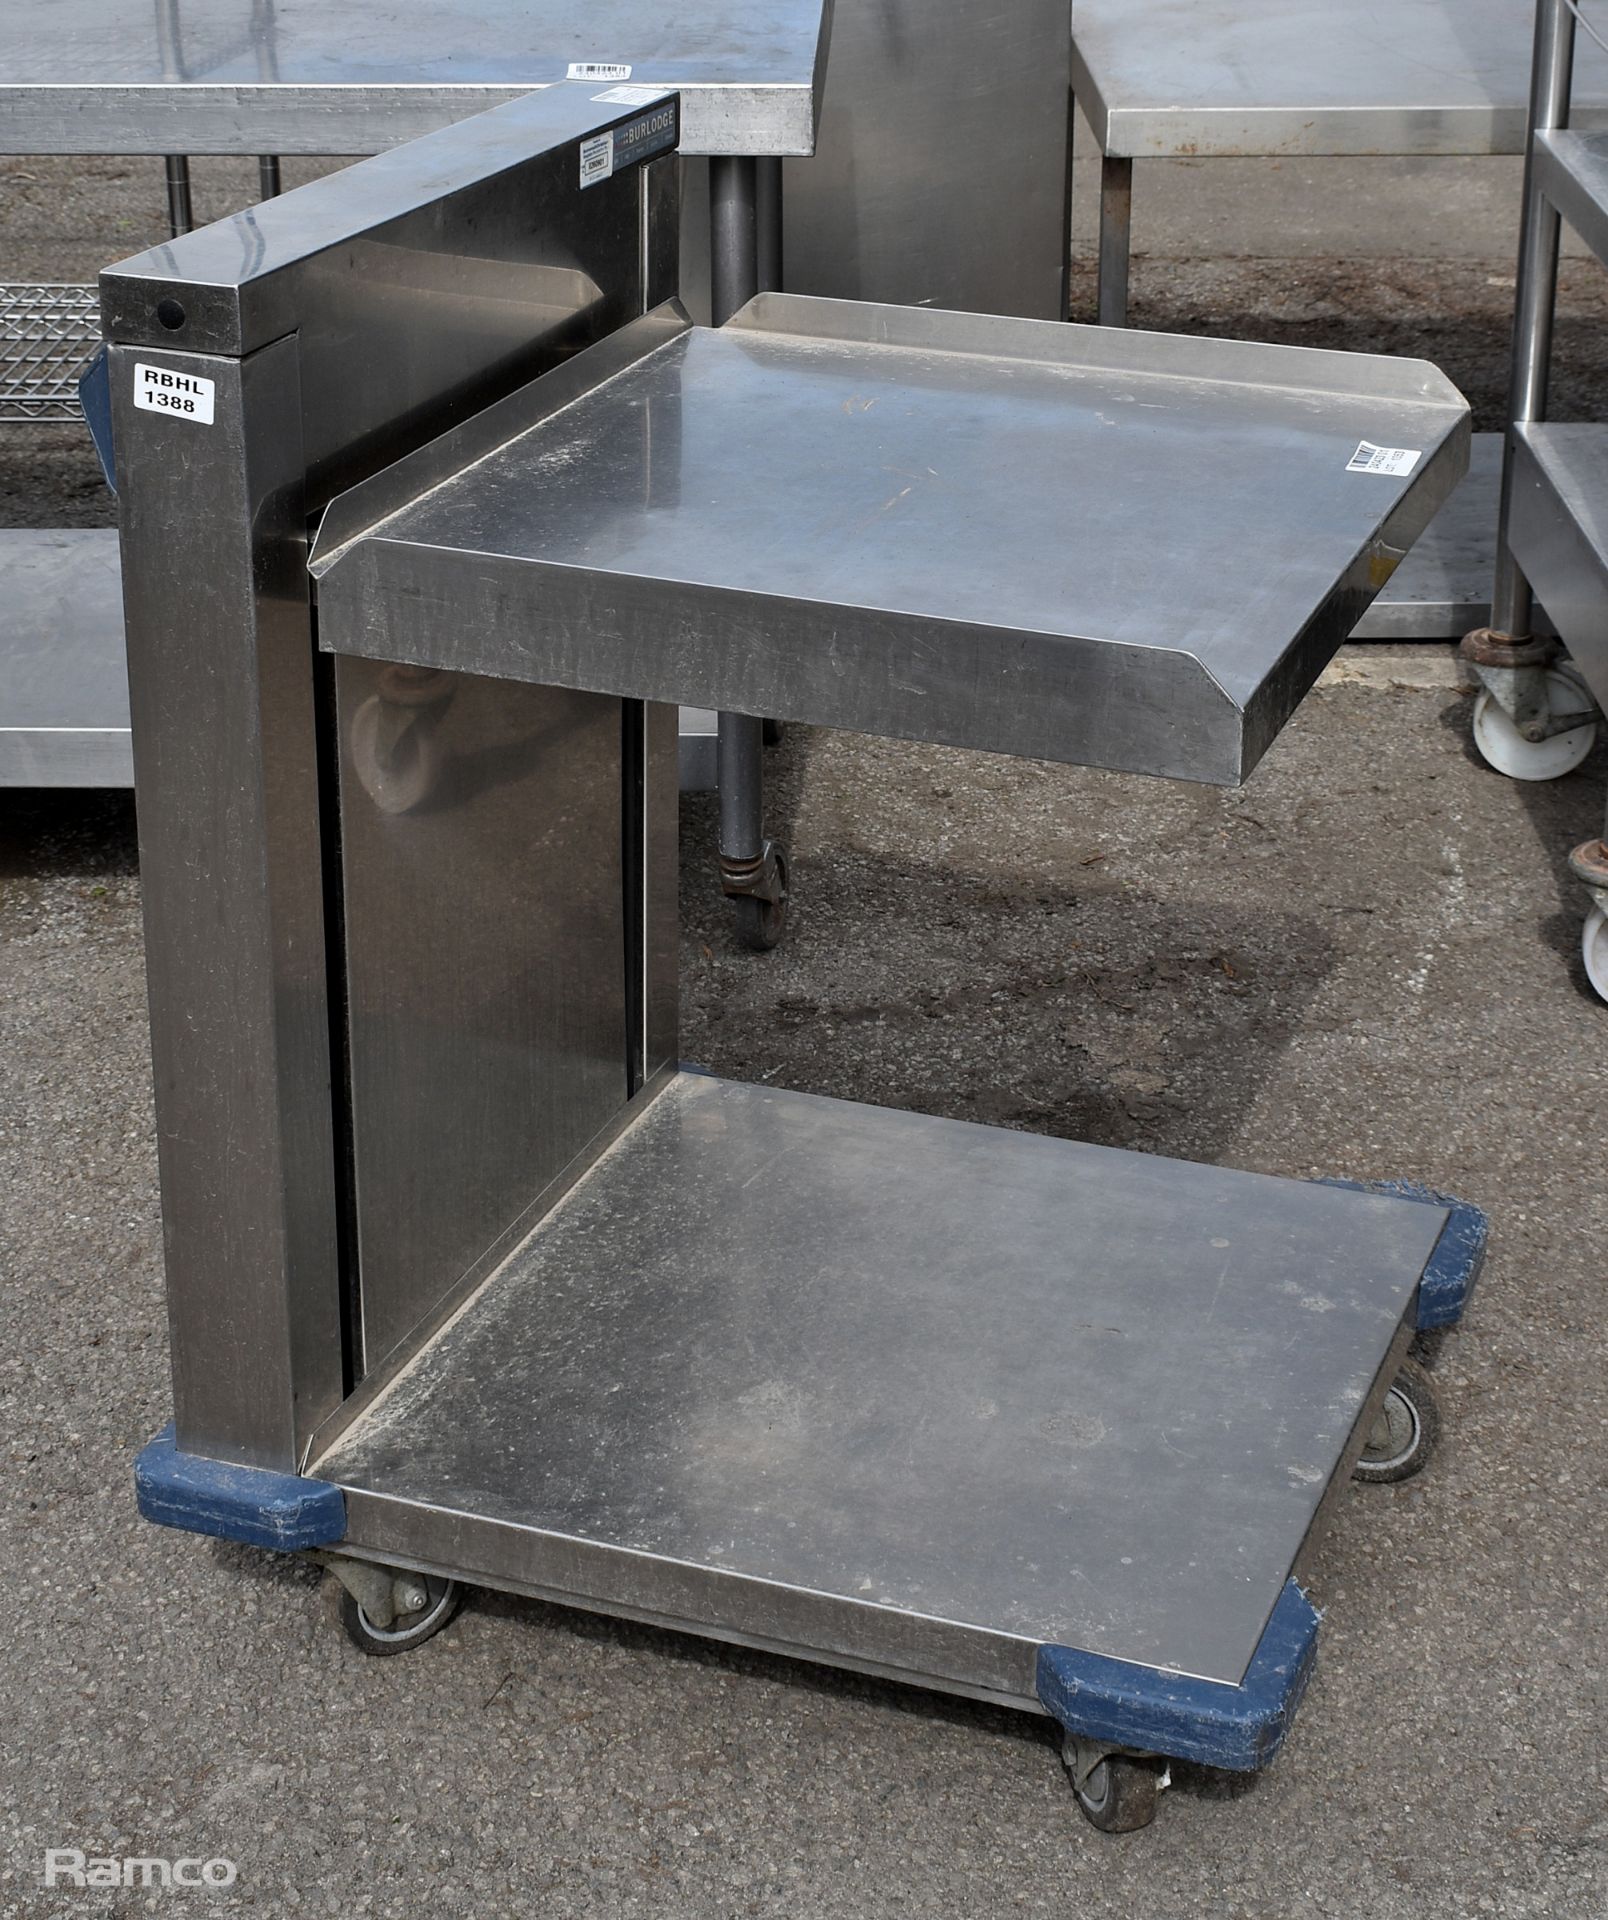 Burlodge stainless steel adjustable self-levelling tray trolley - W 650 x D 770 x H 935mm - Image 2 of 4